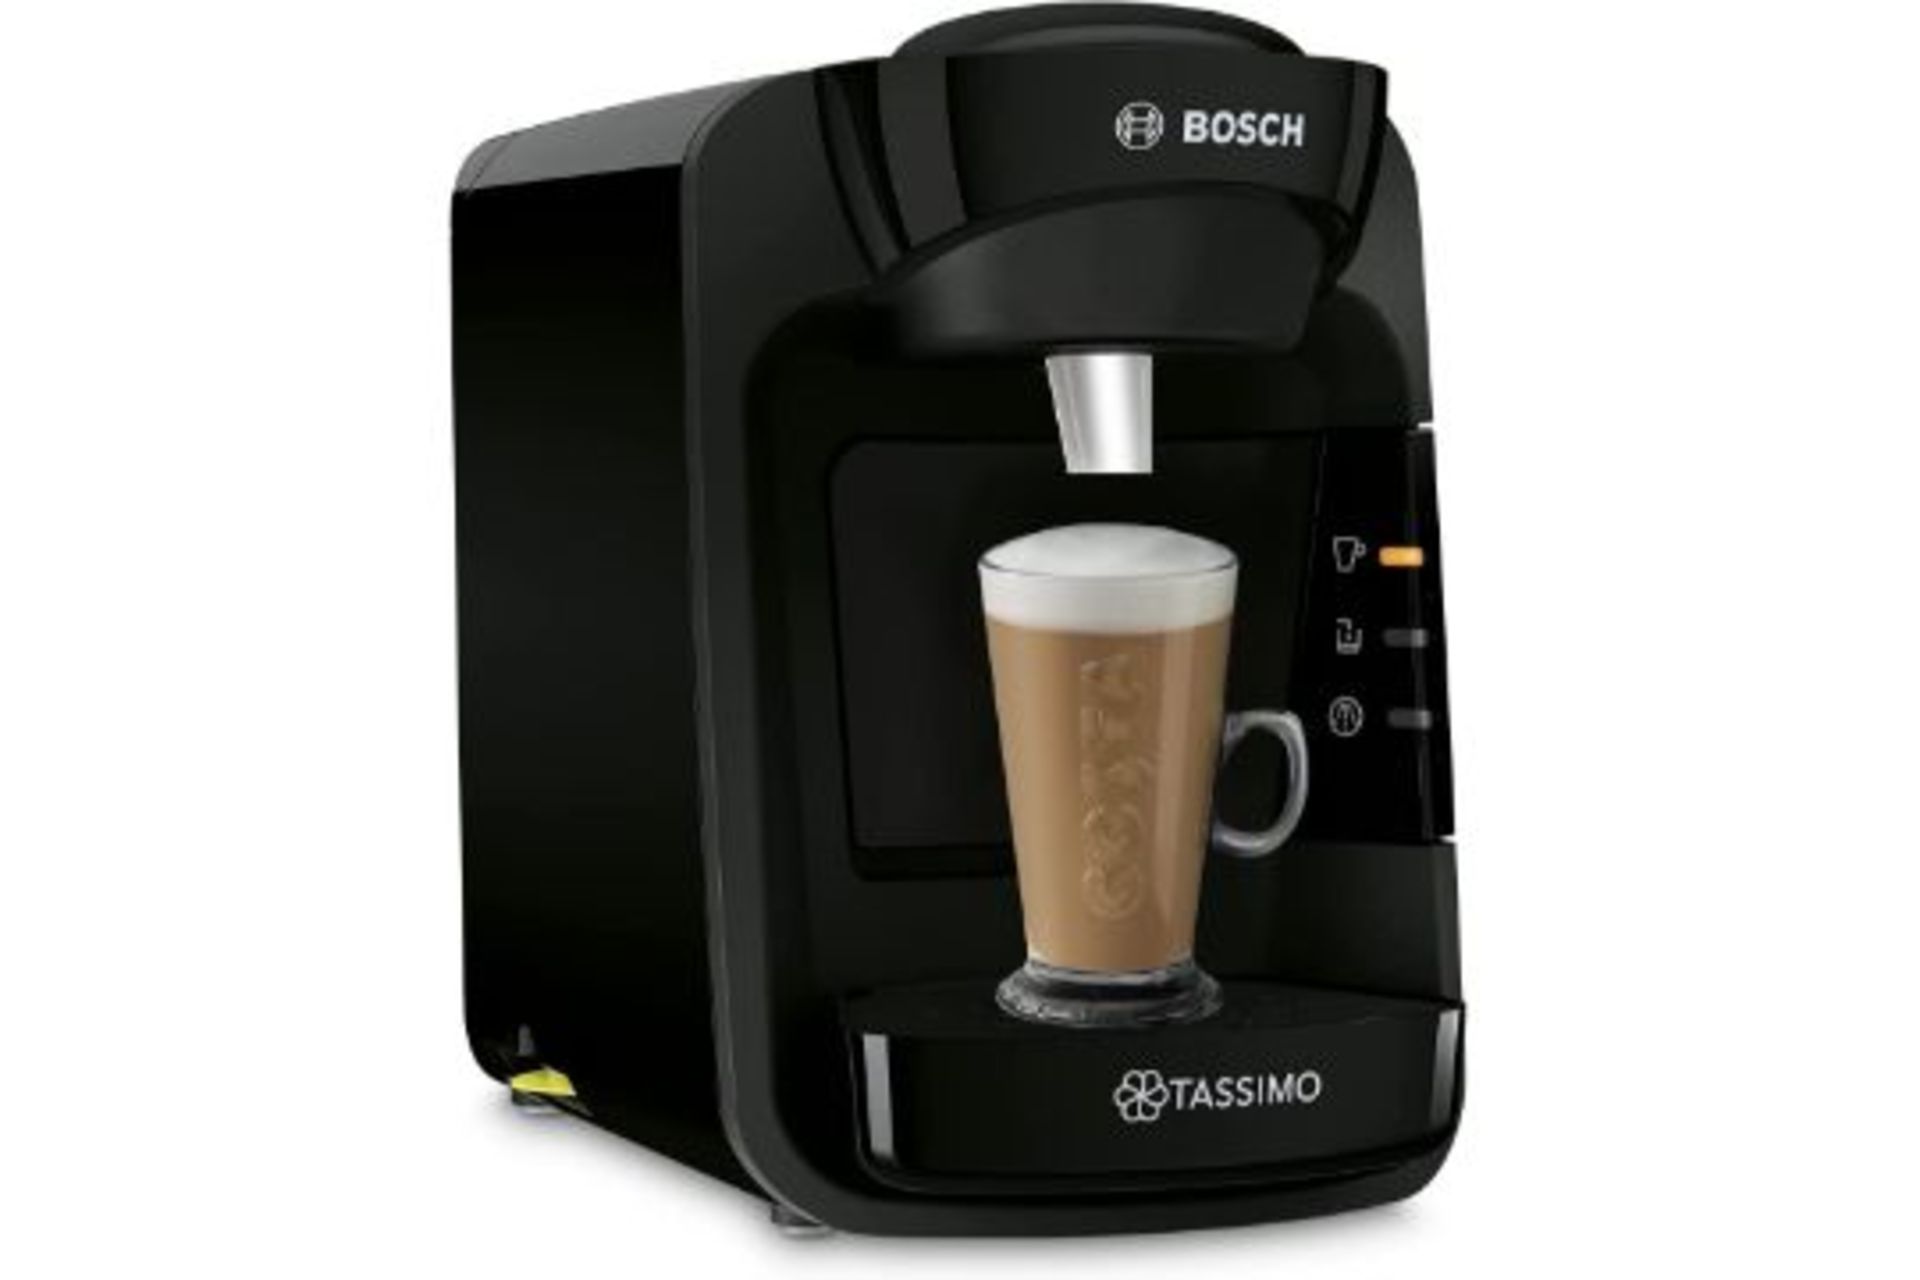 RRP - £39.99 Tassimo by Bosch Suny 'Special Edition' Coffee Machine